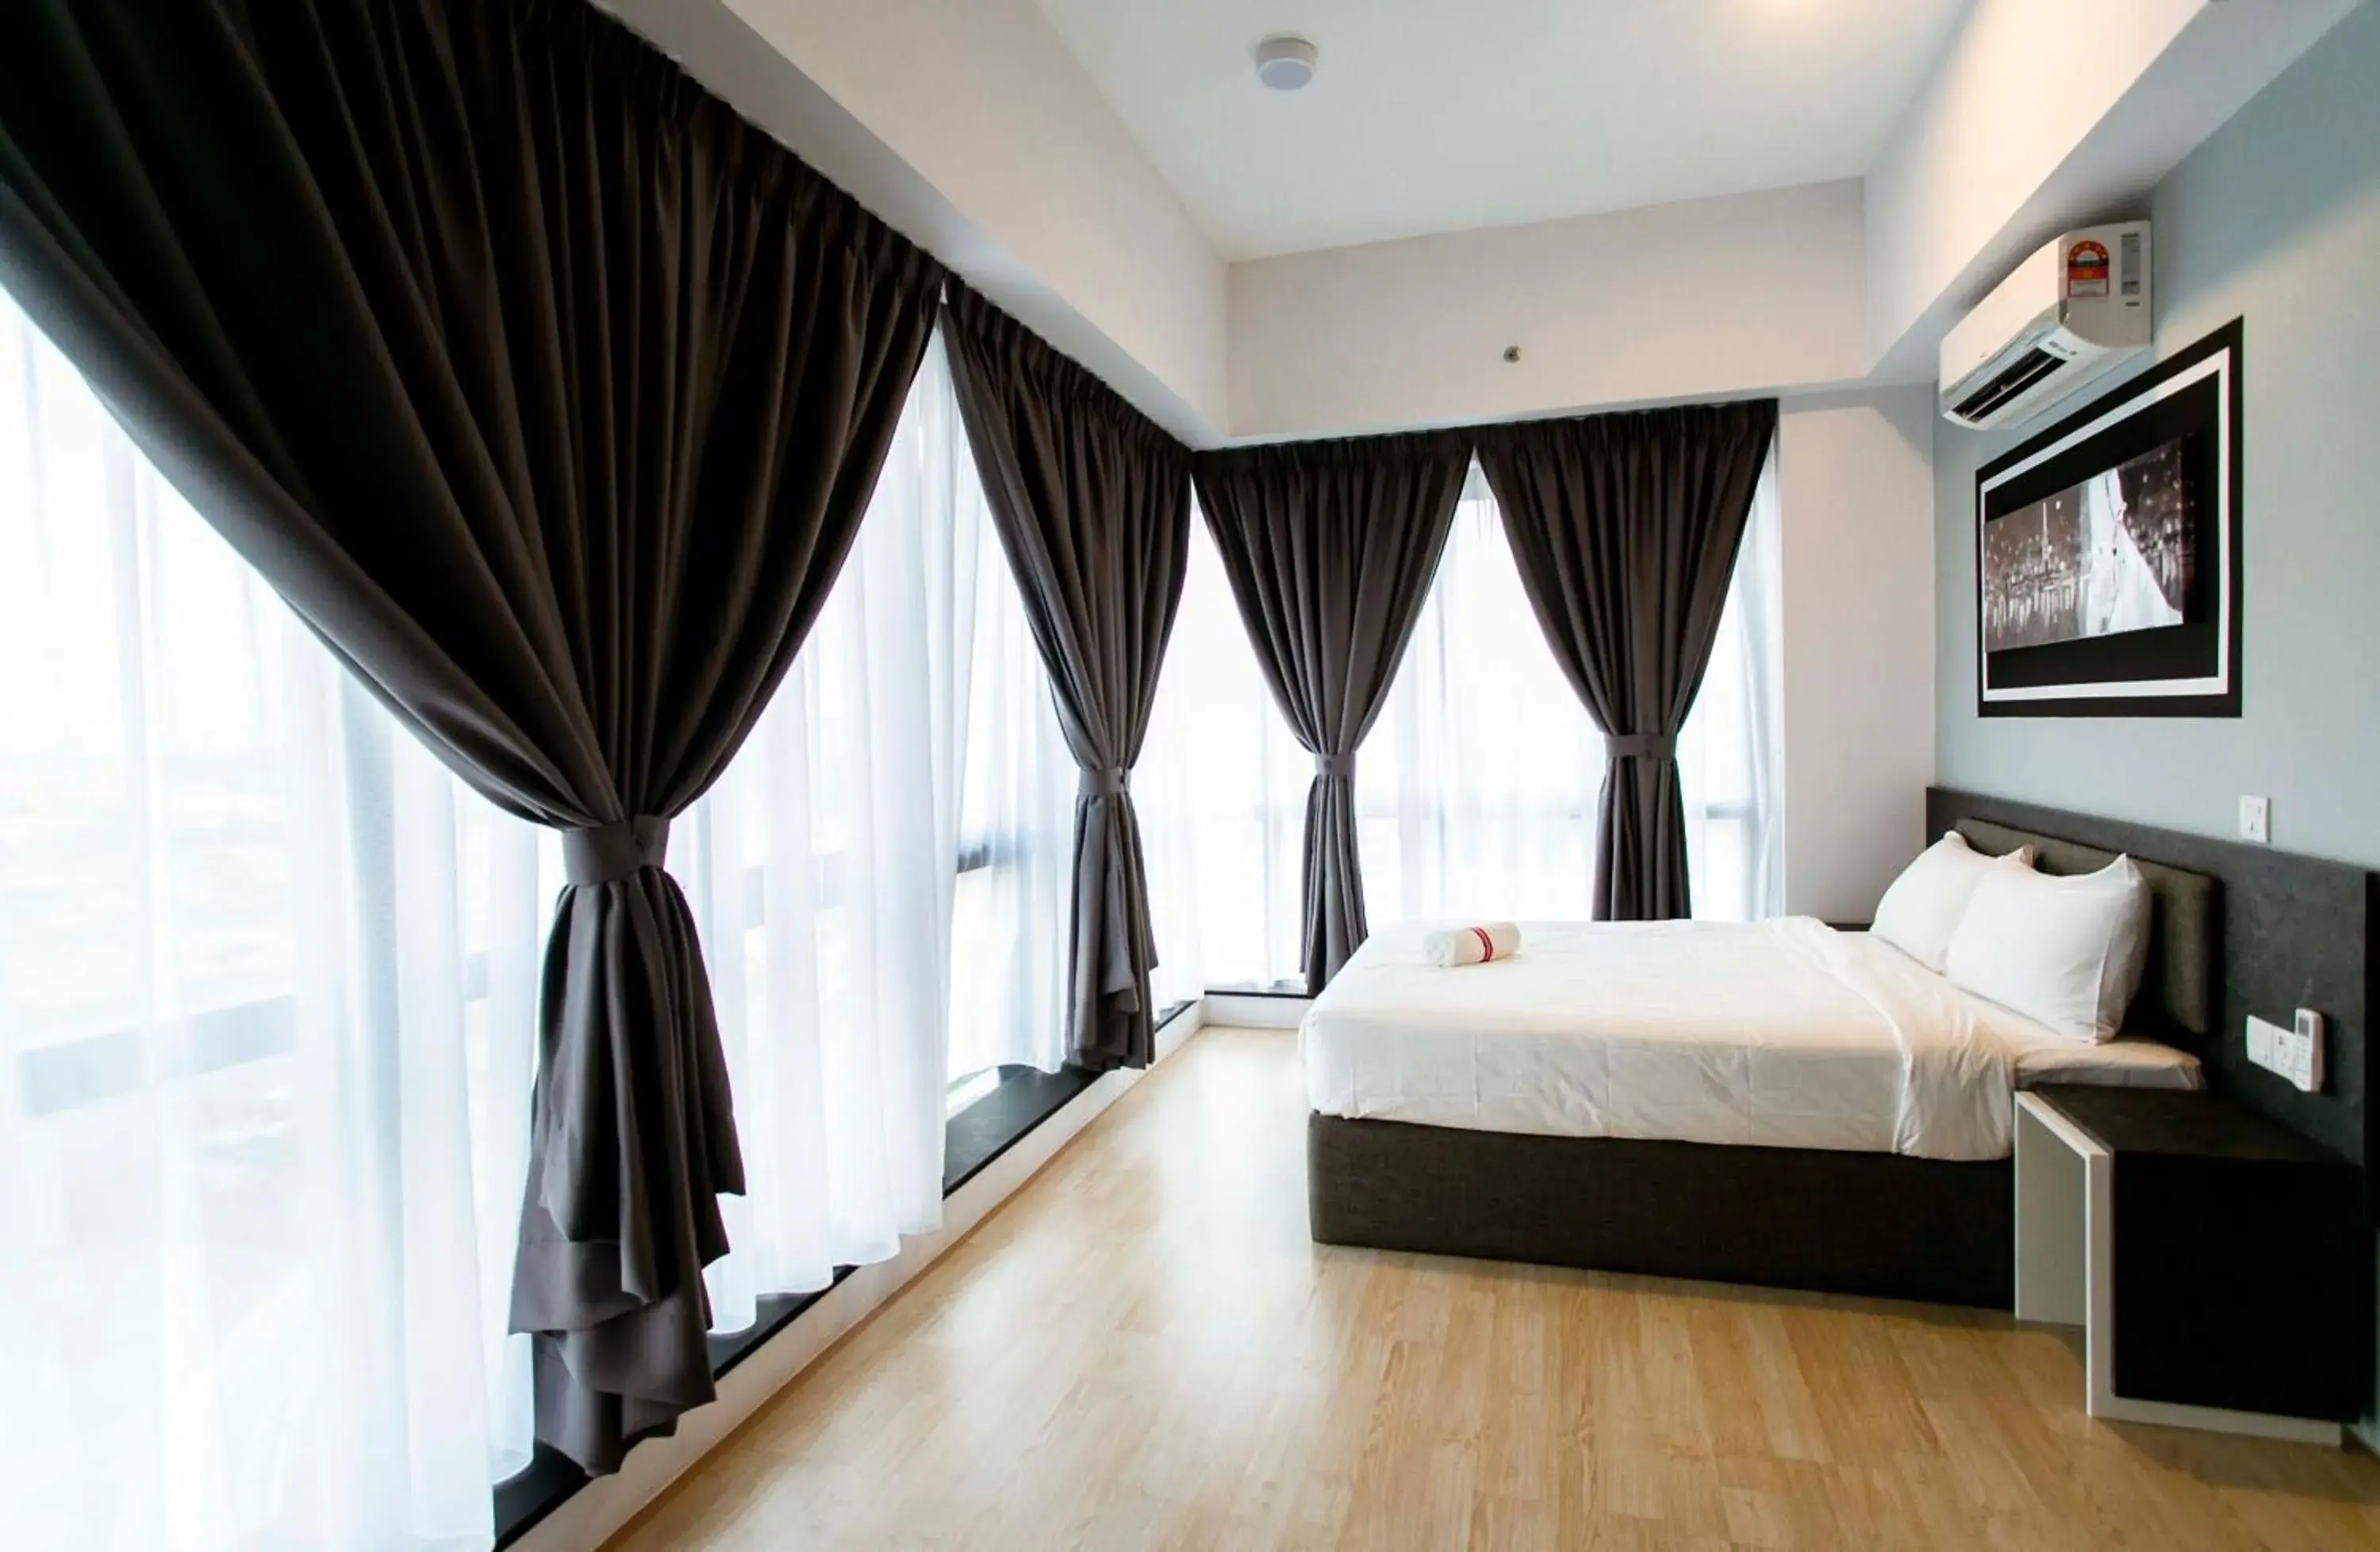 Bed in Aurora Pavilion Bukit Jalil by Ody Suites